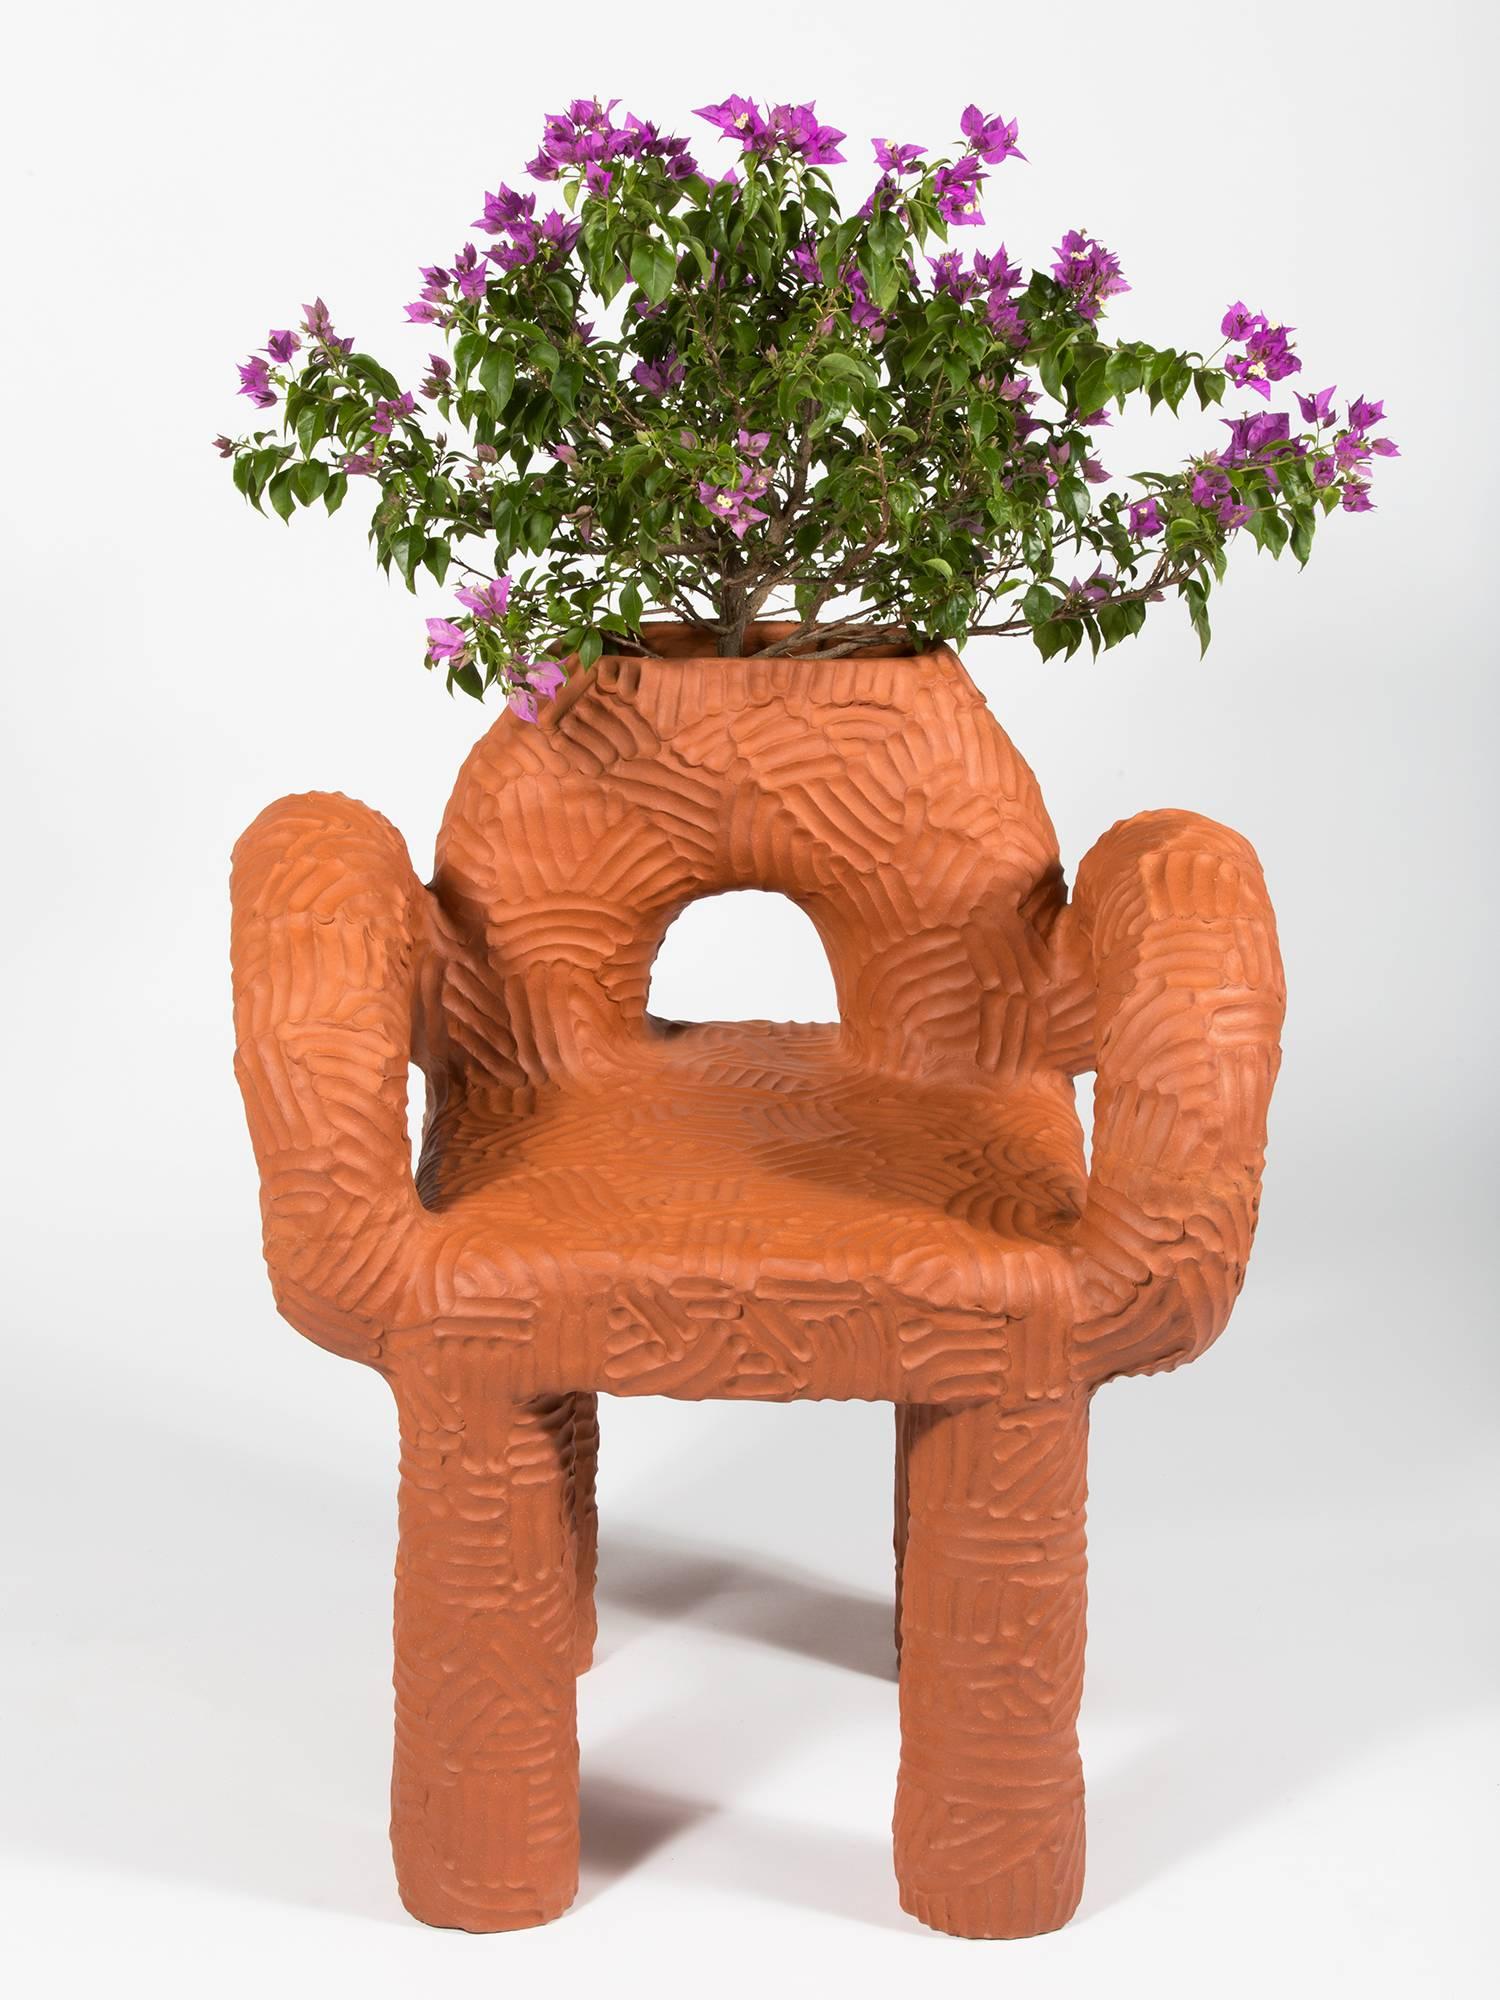 Large terracotta chair, handmade by New York and Medellín-based artist Chris Wolston. Can be used indoors or outdoors. Made to order with a lead time of 12-14 weeks.